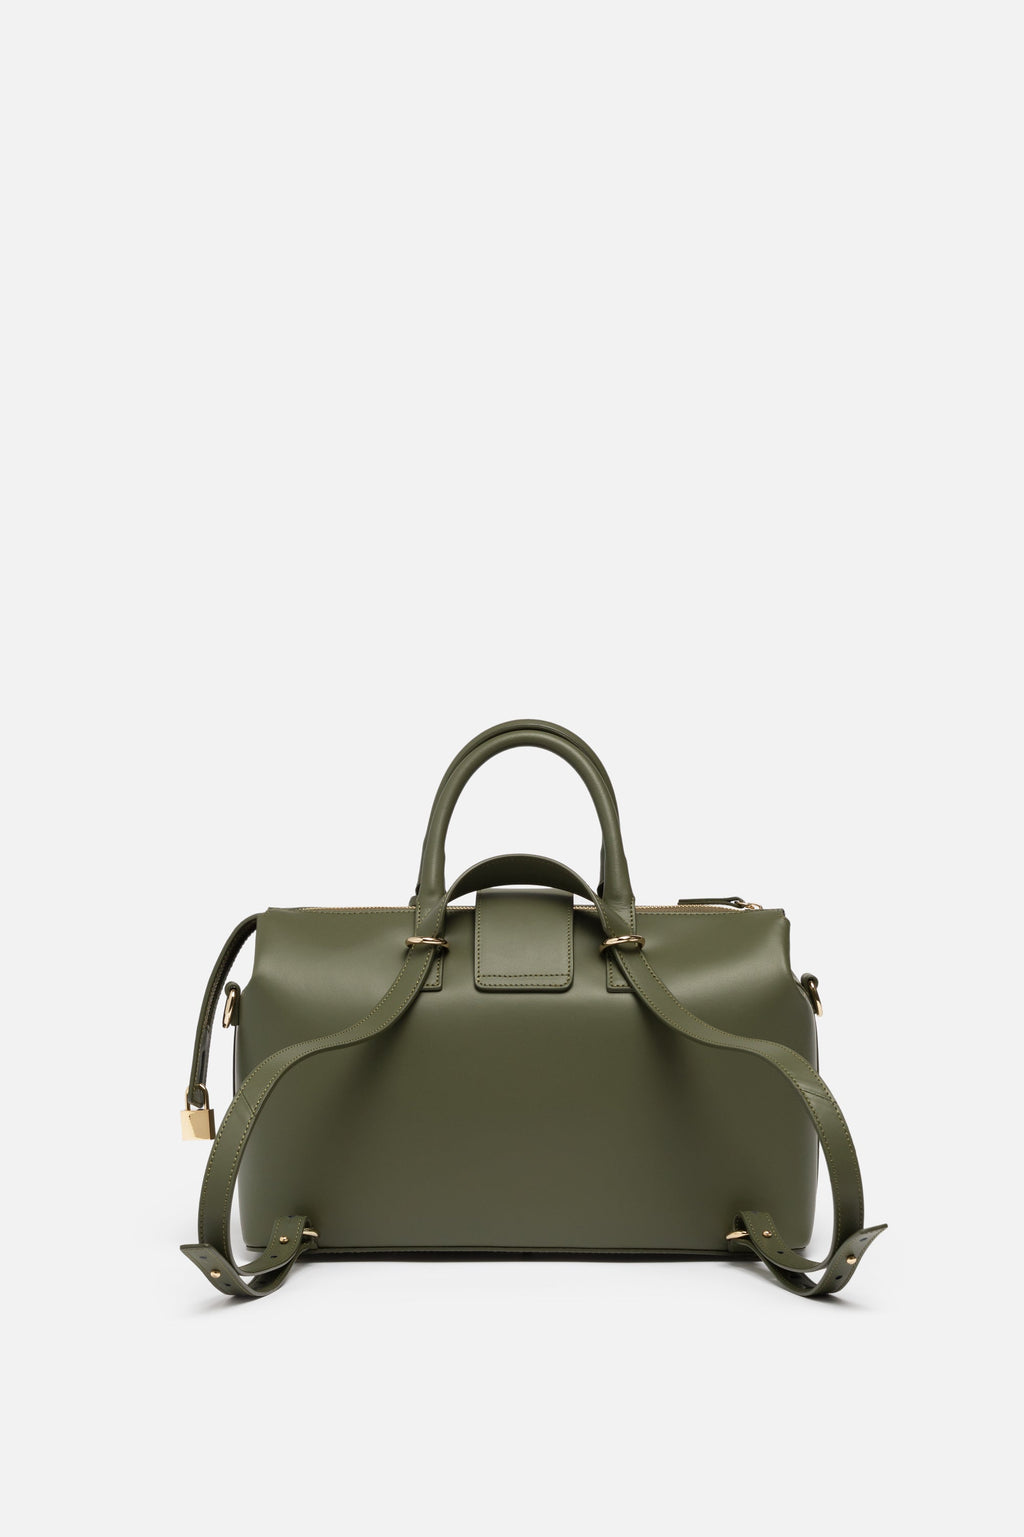 Mcm Green Leather Convertible Tote